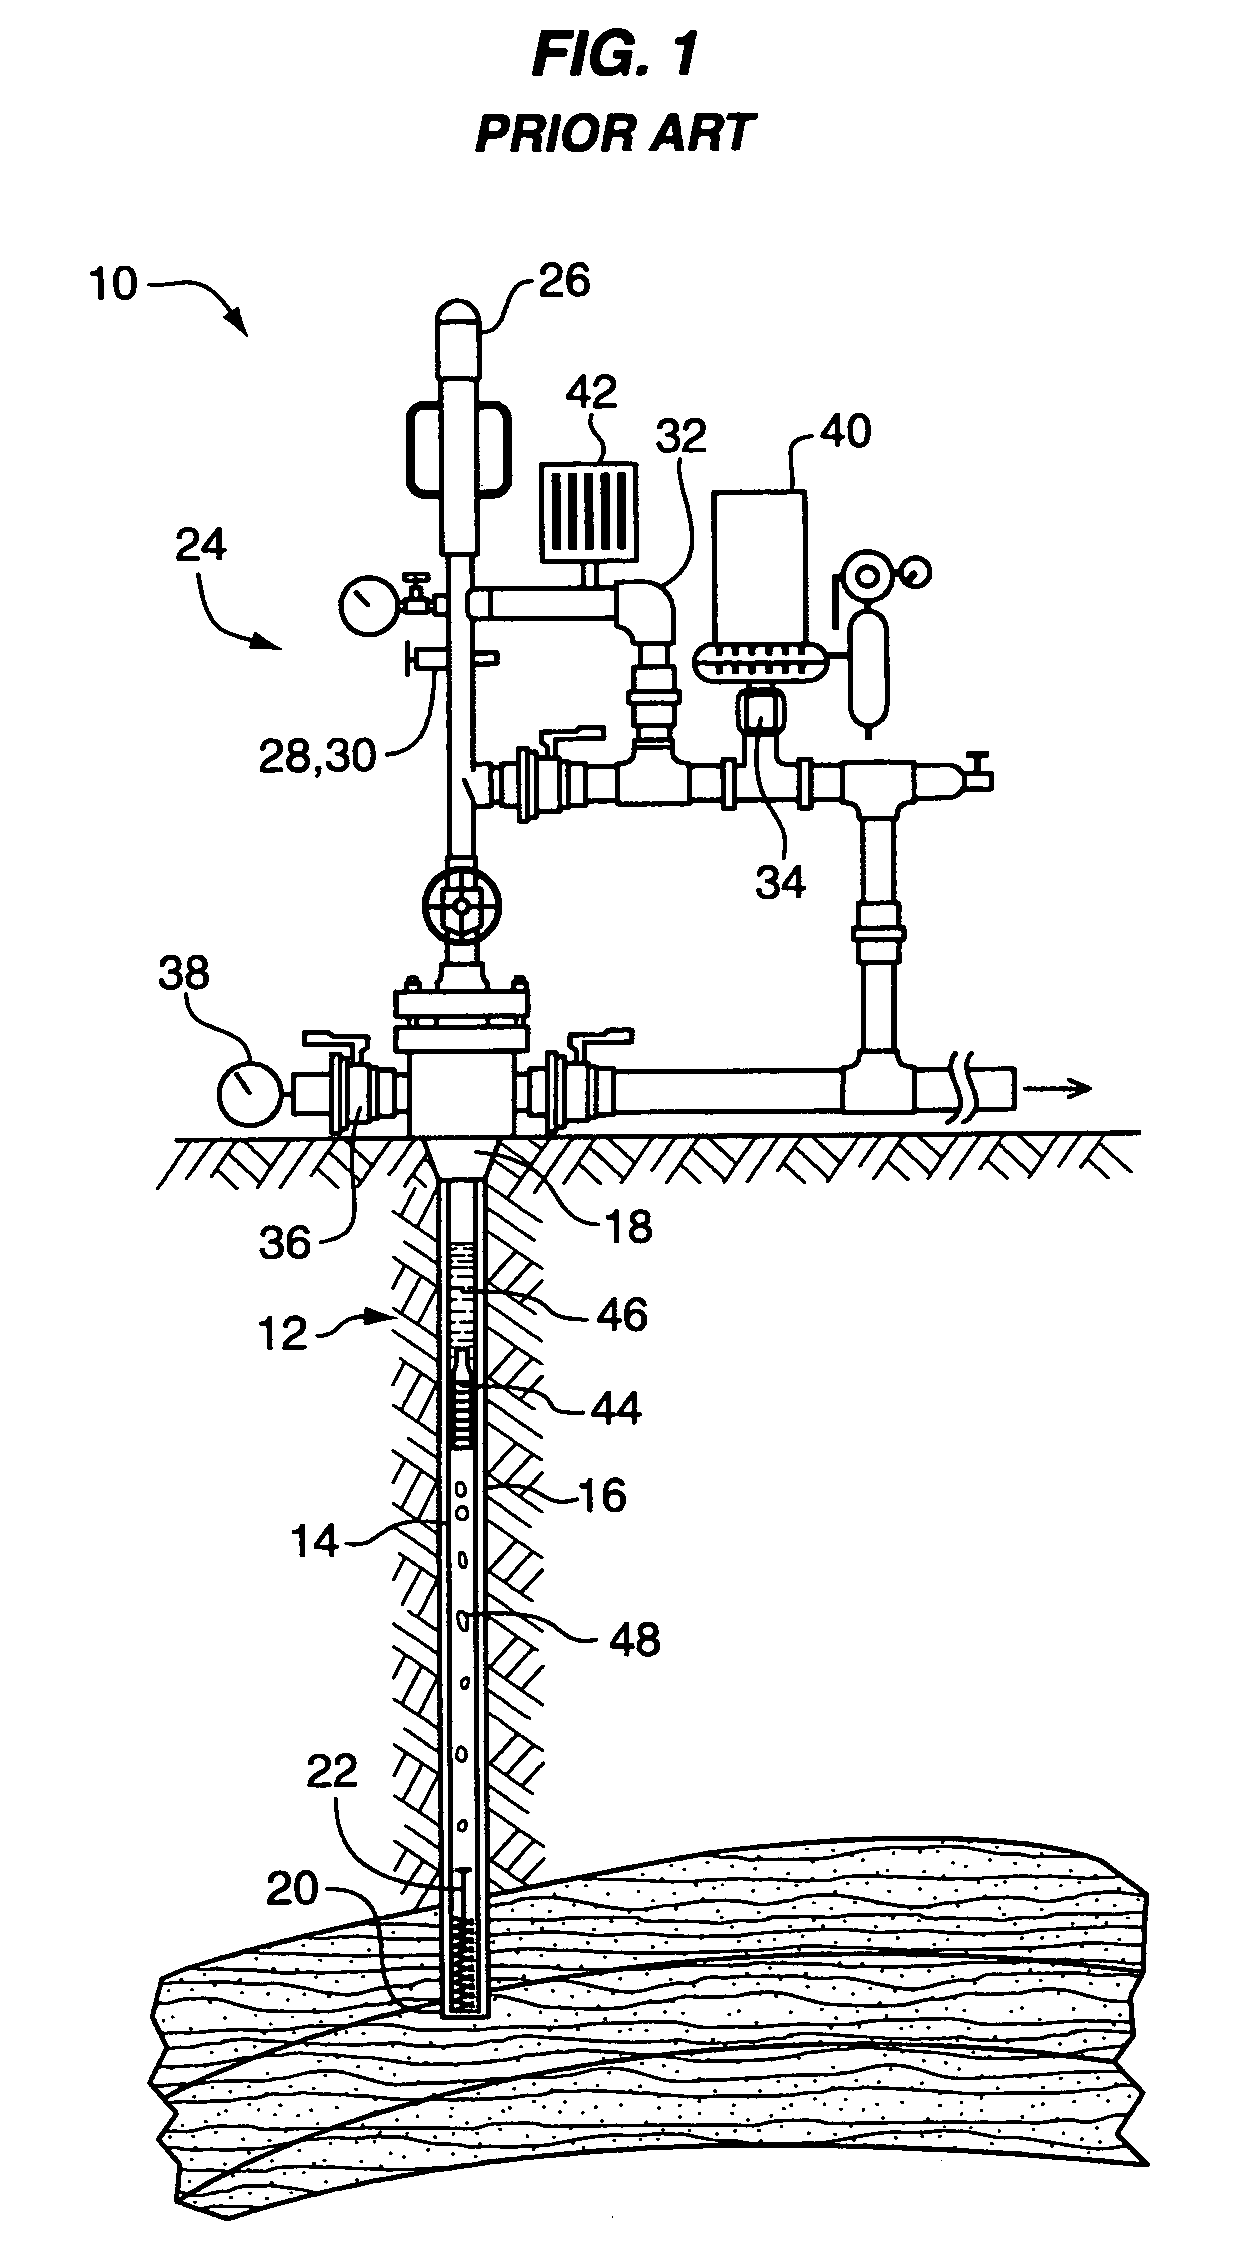 Instrumented plunger for an oil or gas well